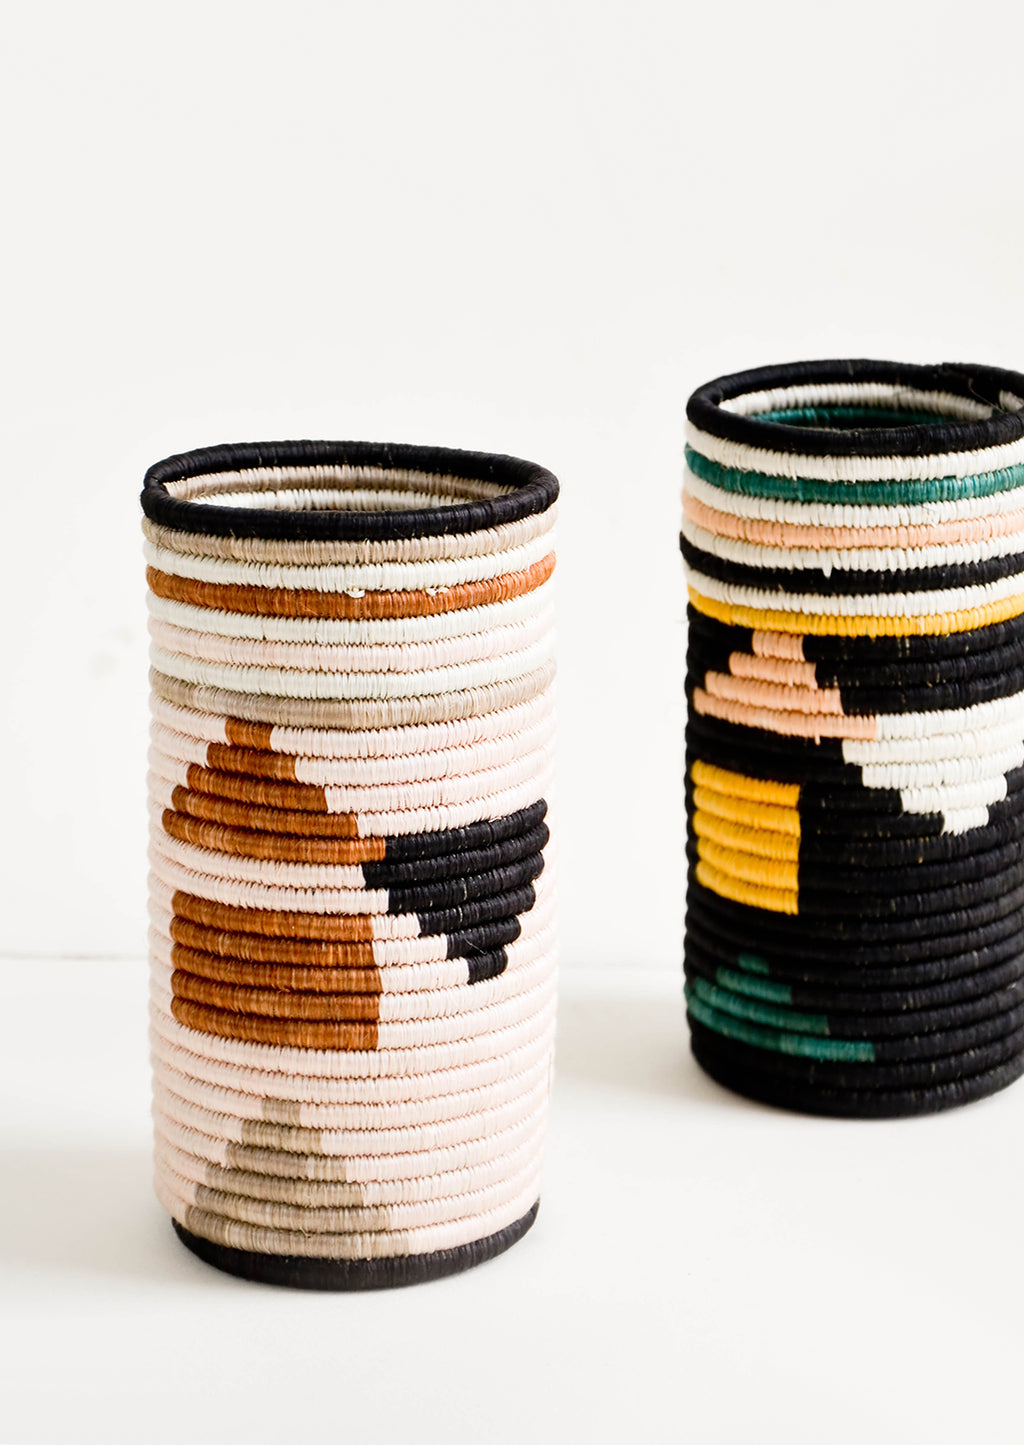 2: Tall vases made of woven natural grass in colorful geometric pattern